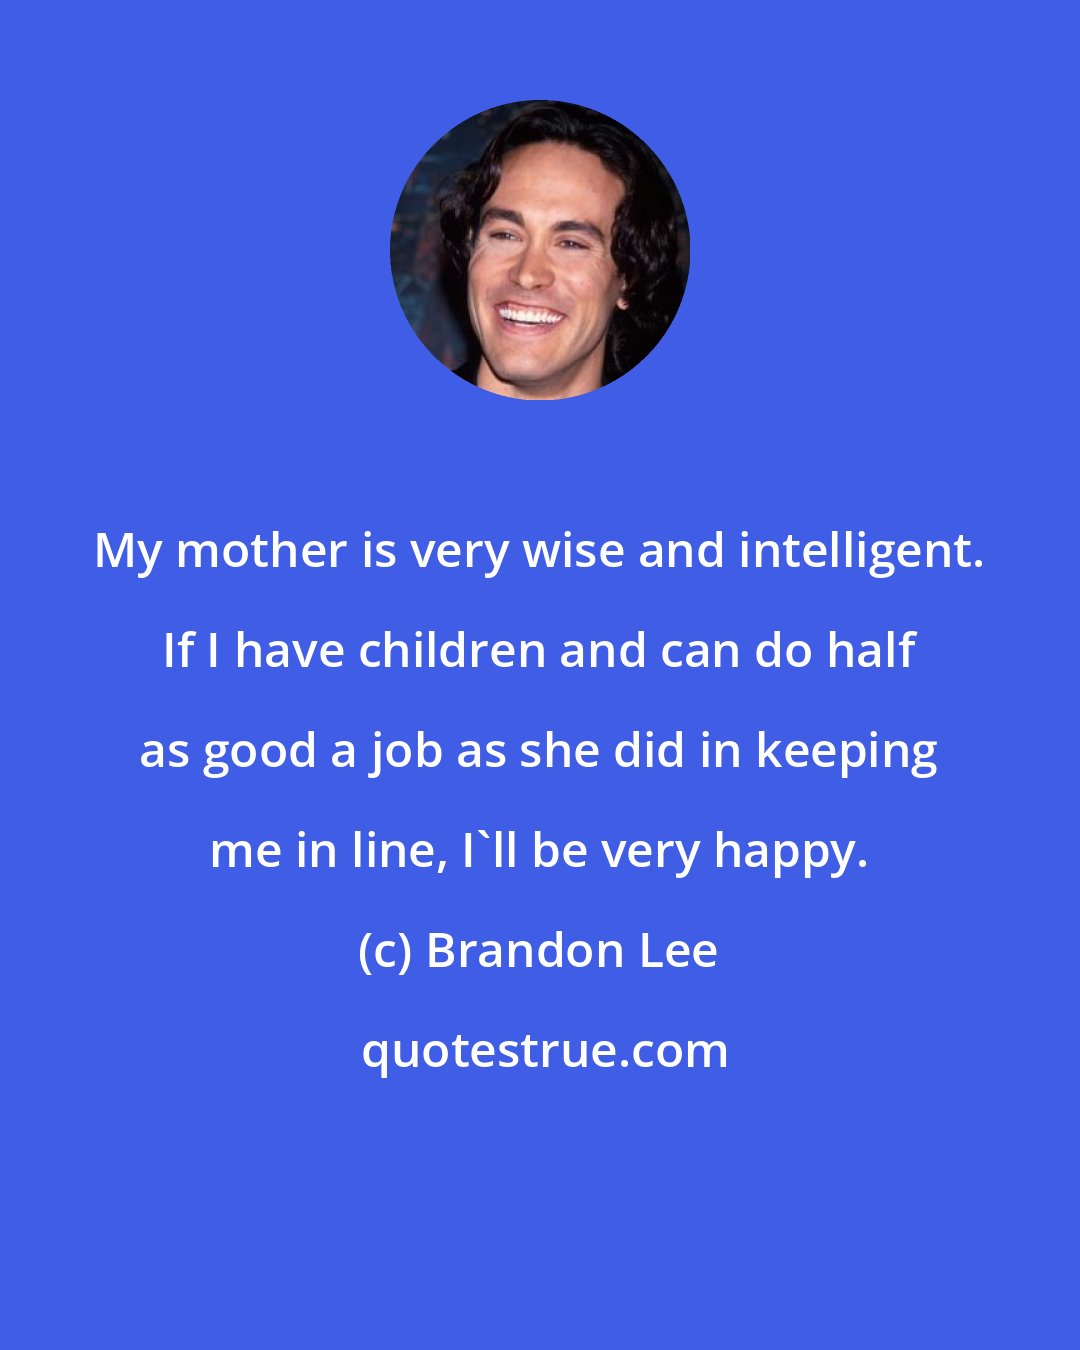 Brandon Lee: My mother is very wise and intelligent. If I have children and can do half as good a job as she did in keeping me in line, I'll be very happy.